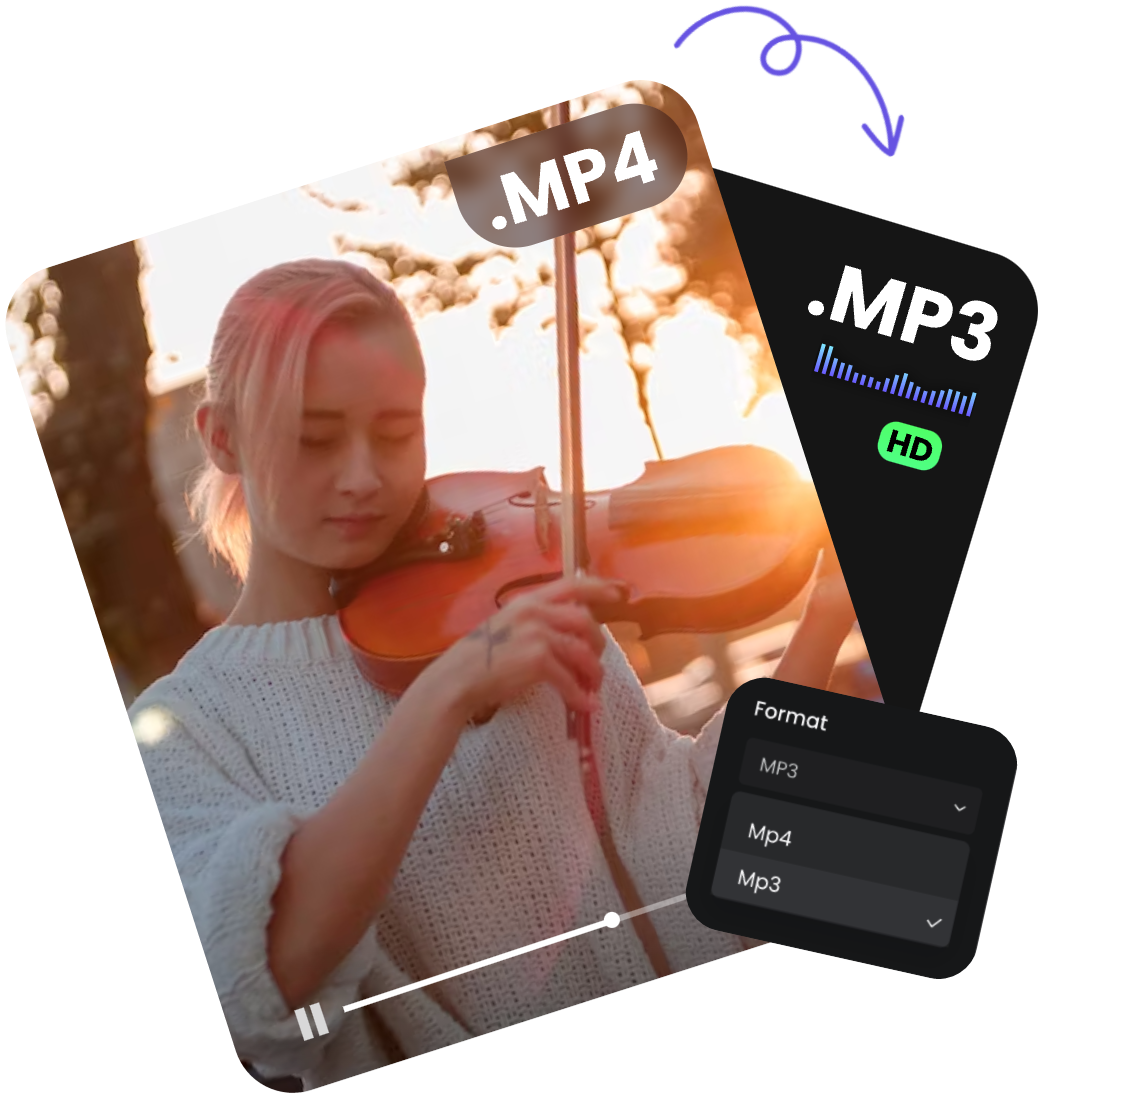 extract audio in MP3 format from a MP4 file